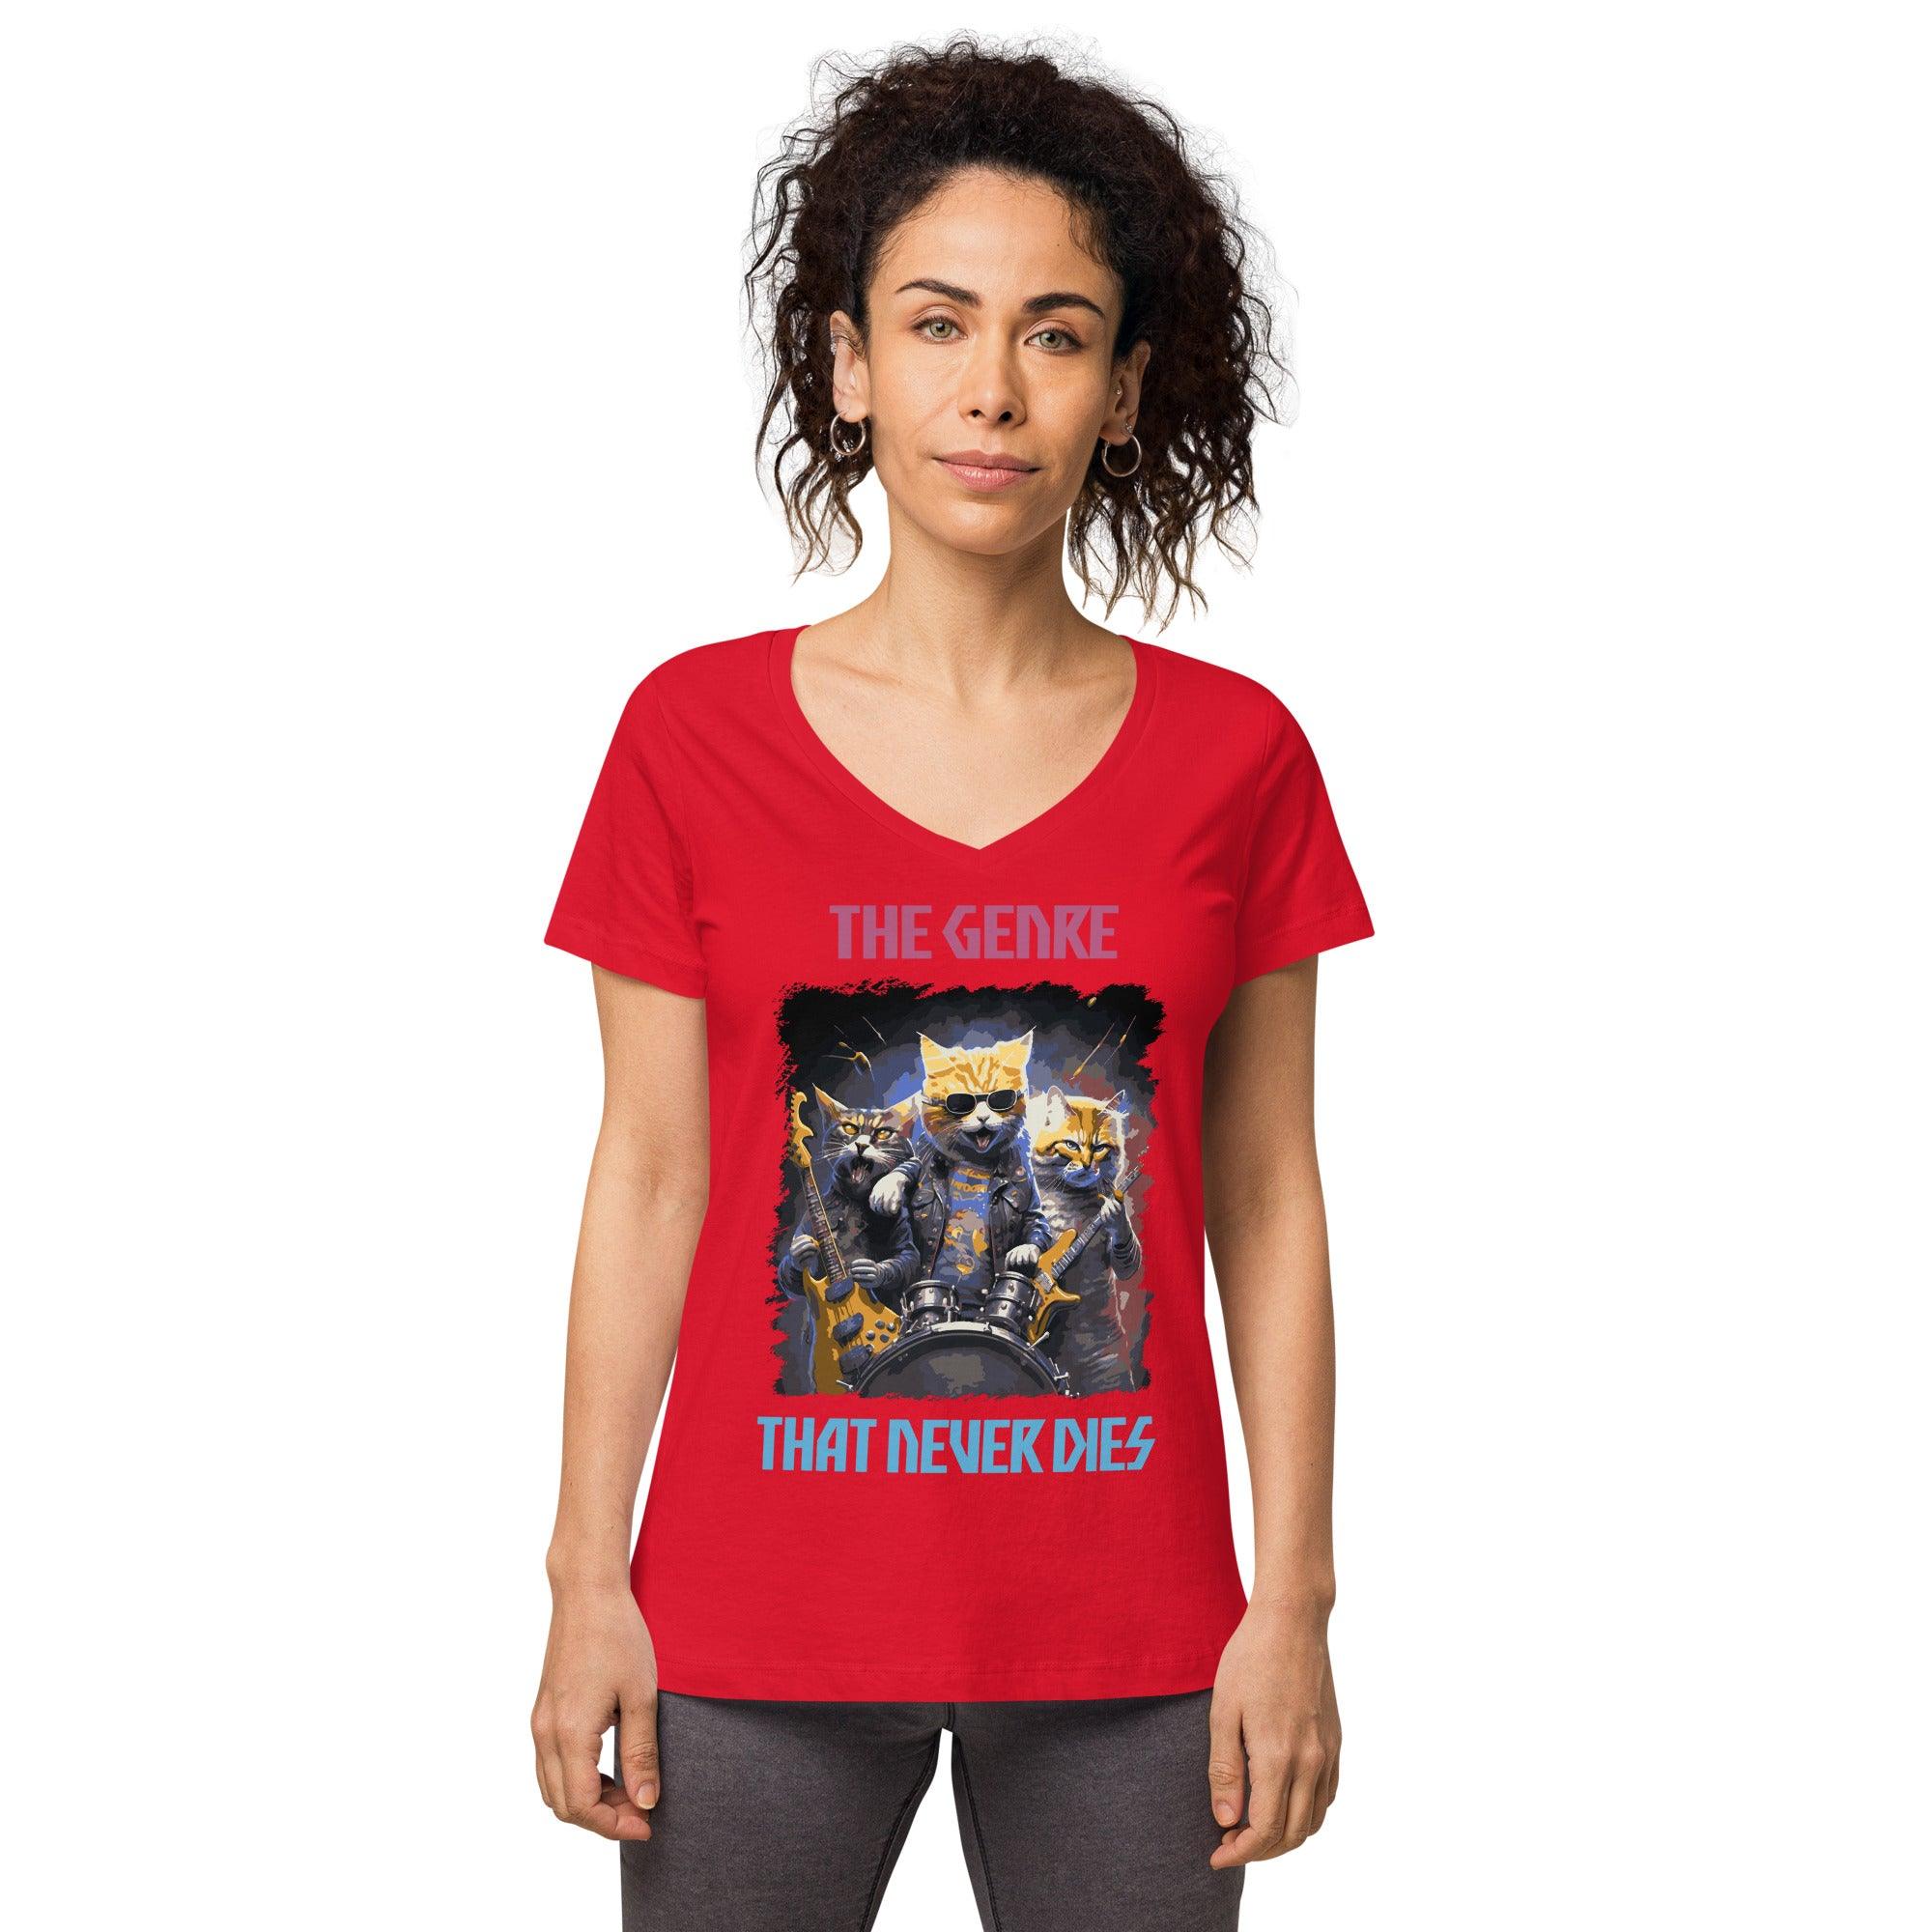 The genre That Never Dies Women’s fitted v-neck t-shirt - Beyond T-shirts